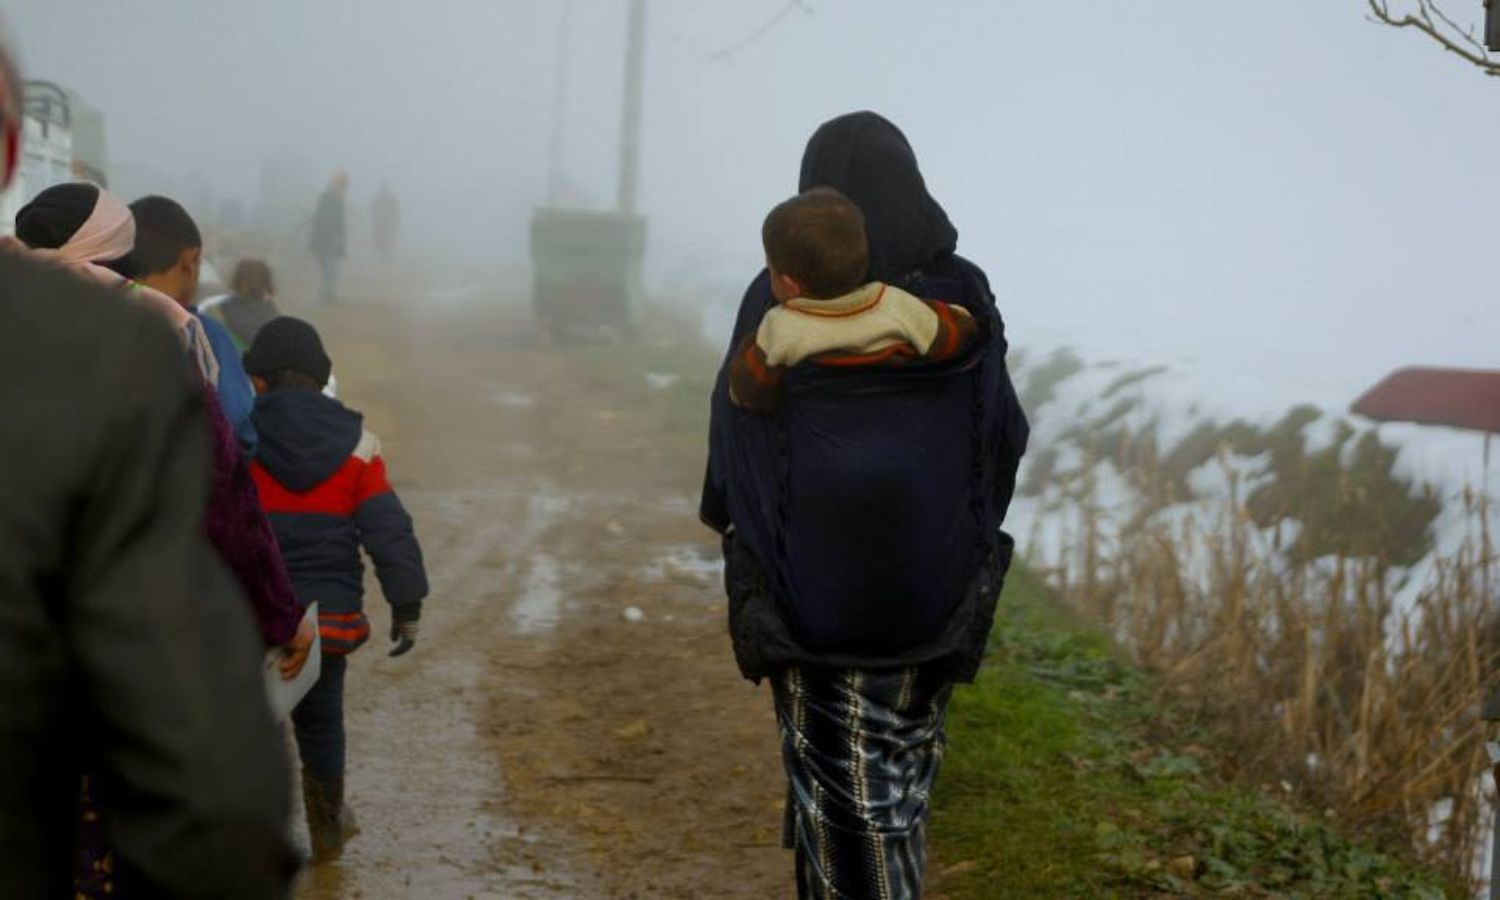 Syrian refugees in the Bekaa Valley, Lebanon - 2015 (Access Center for Human Rights)